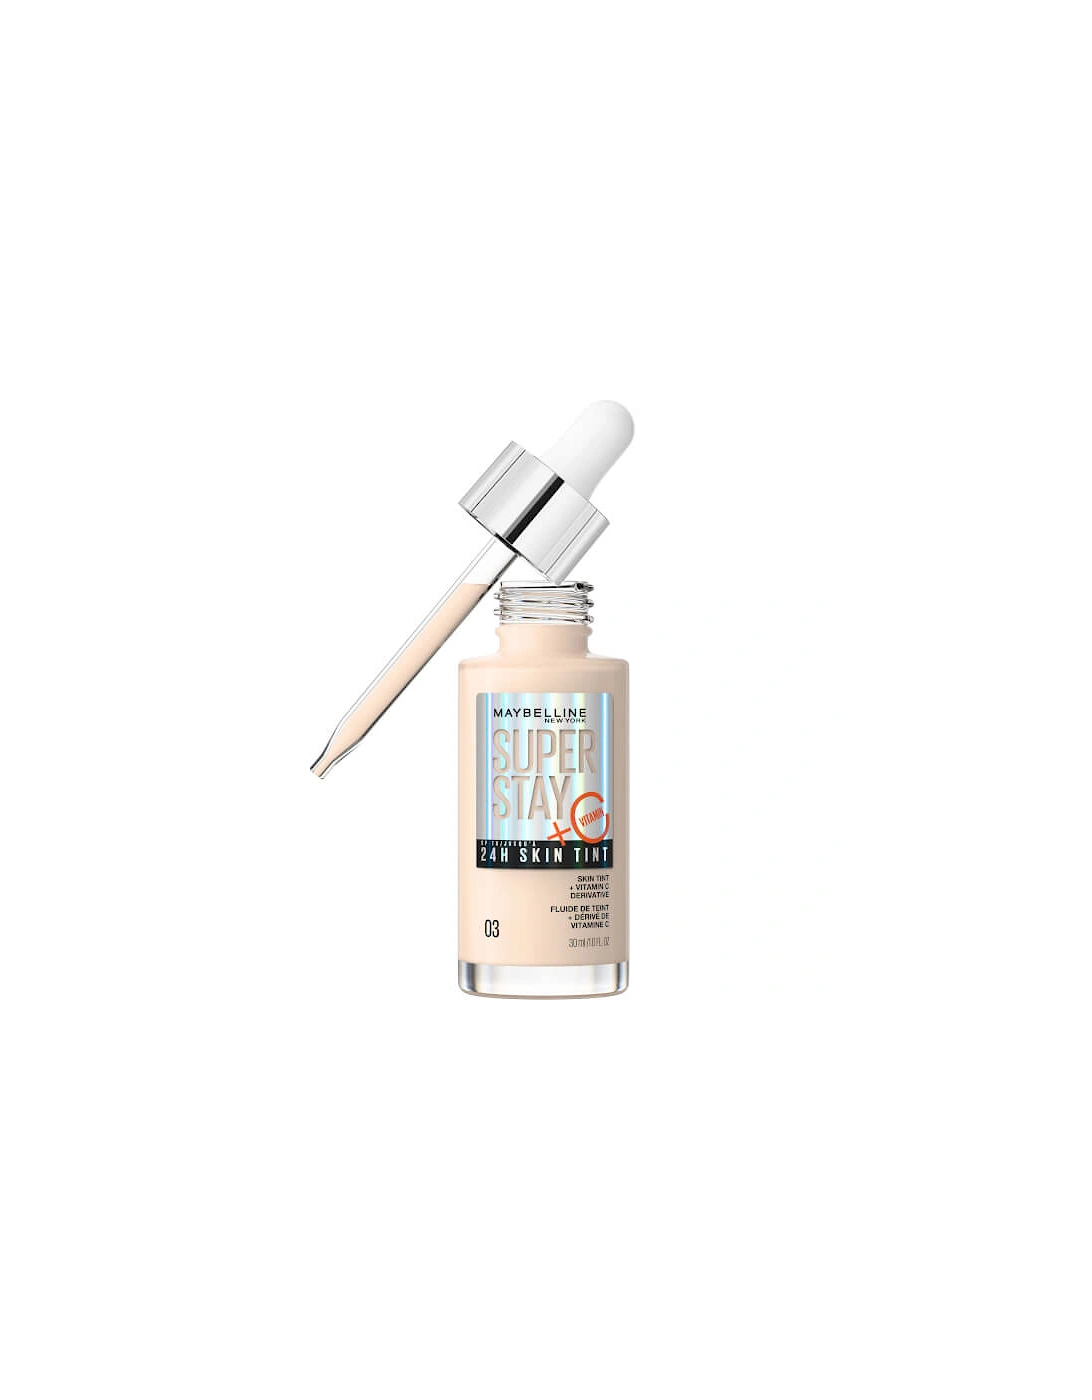 Super Stay up to 24H Skin Tint Foundation + Vitamin C - Shade 03, 2 of 1